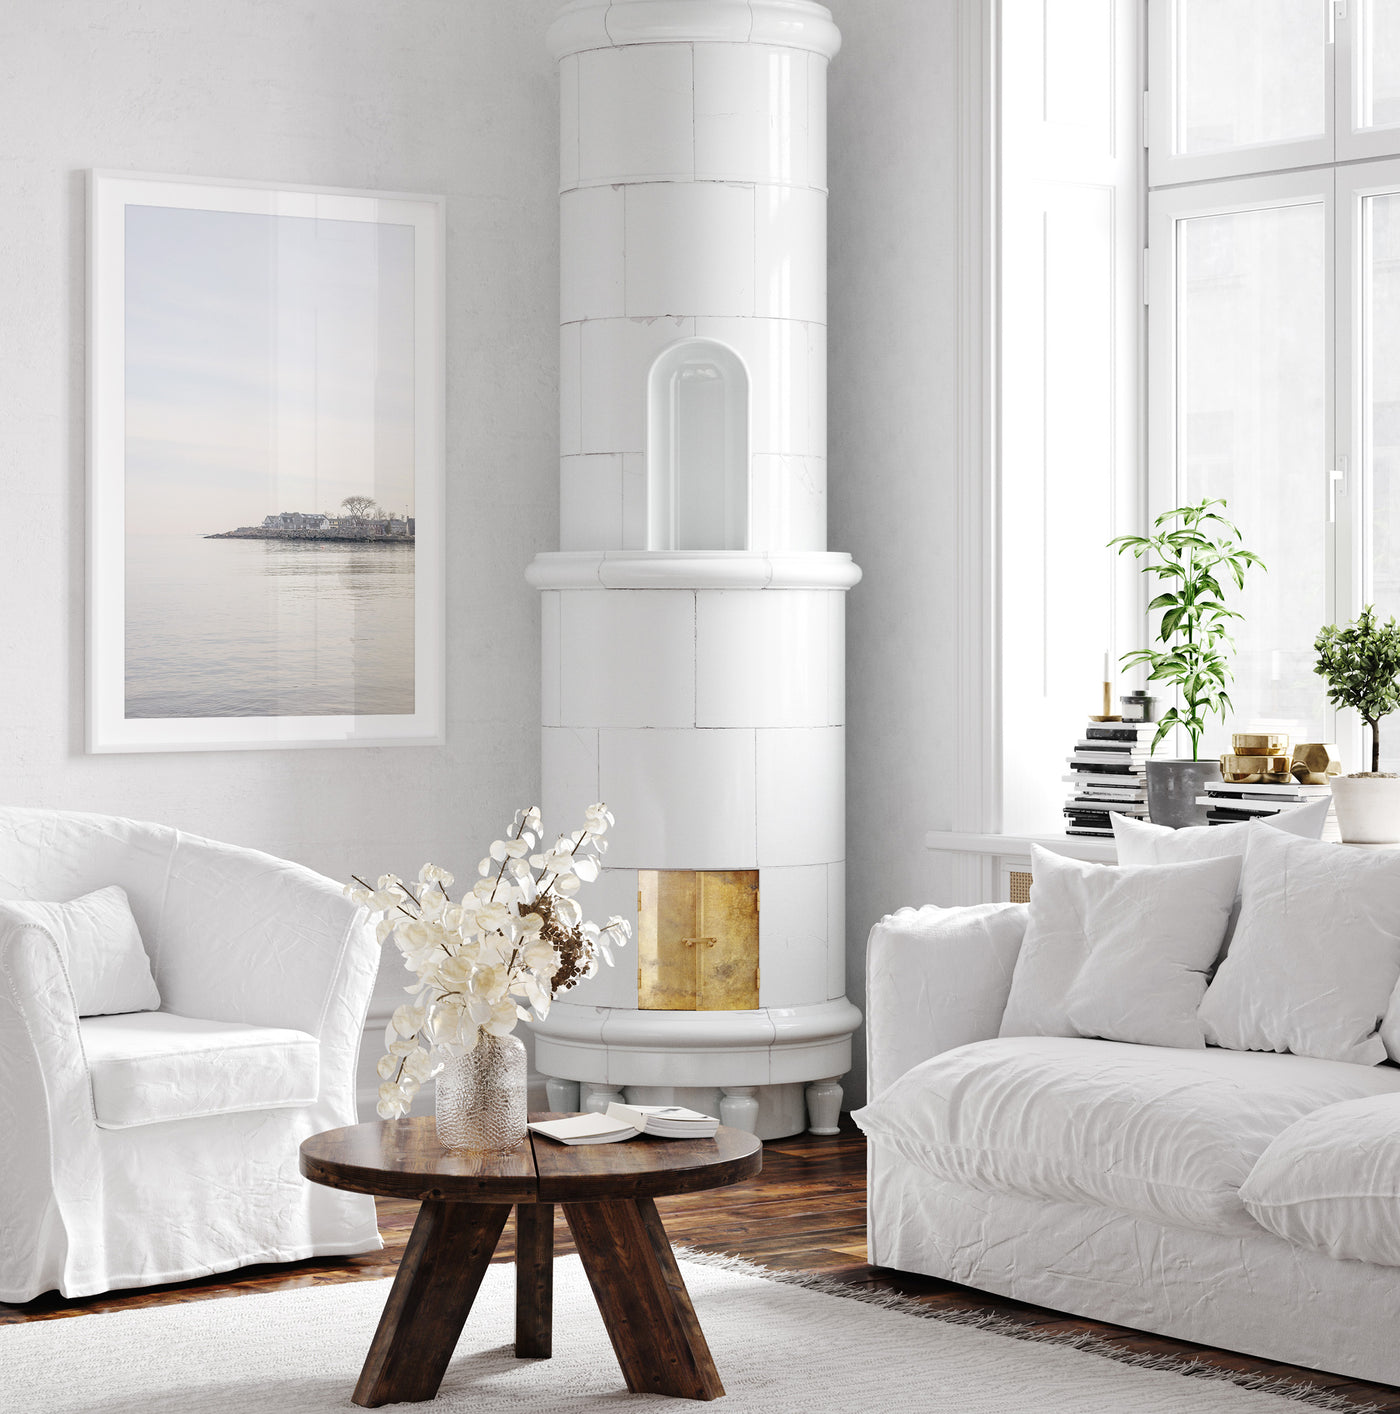 Rockport, MA - Art print by Cattie Coyle Photography in Scandinavian living room